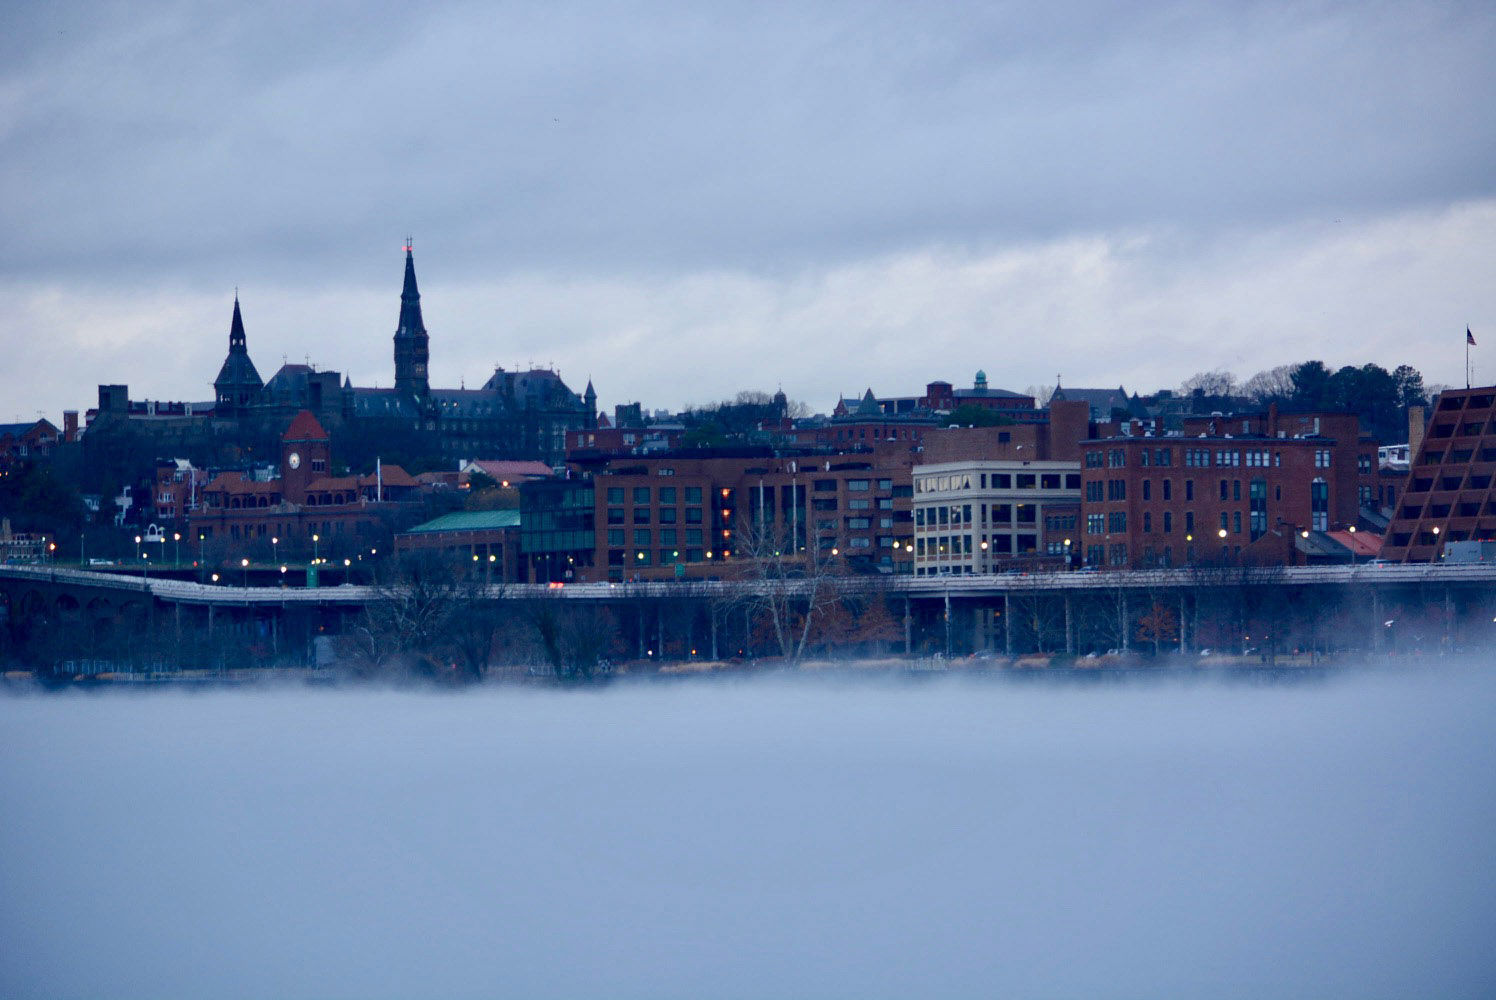 Georgetown is seen across a blanket of fog on the Potomac River on Friday, Jan. 12, 2018. (WTOP/Dave Dildine)